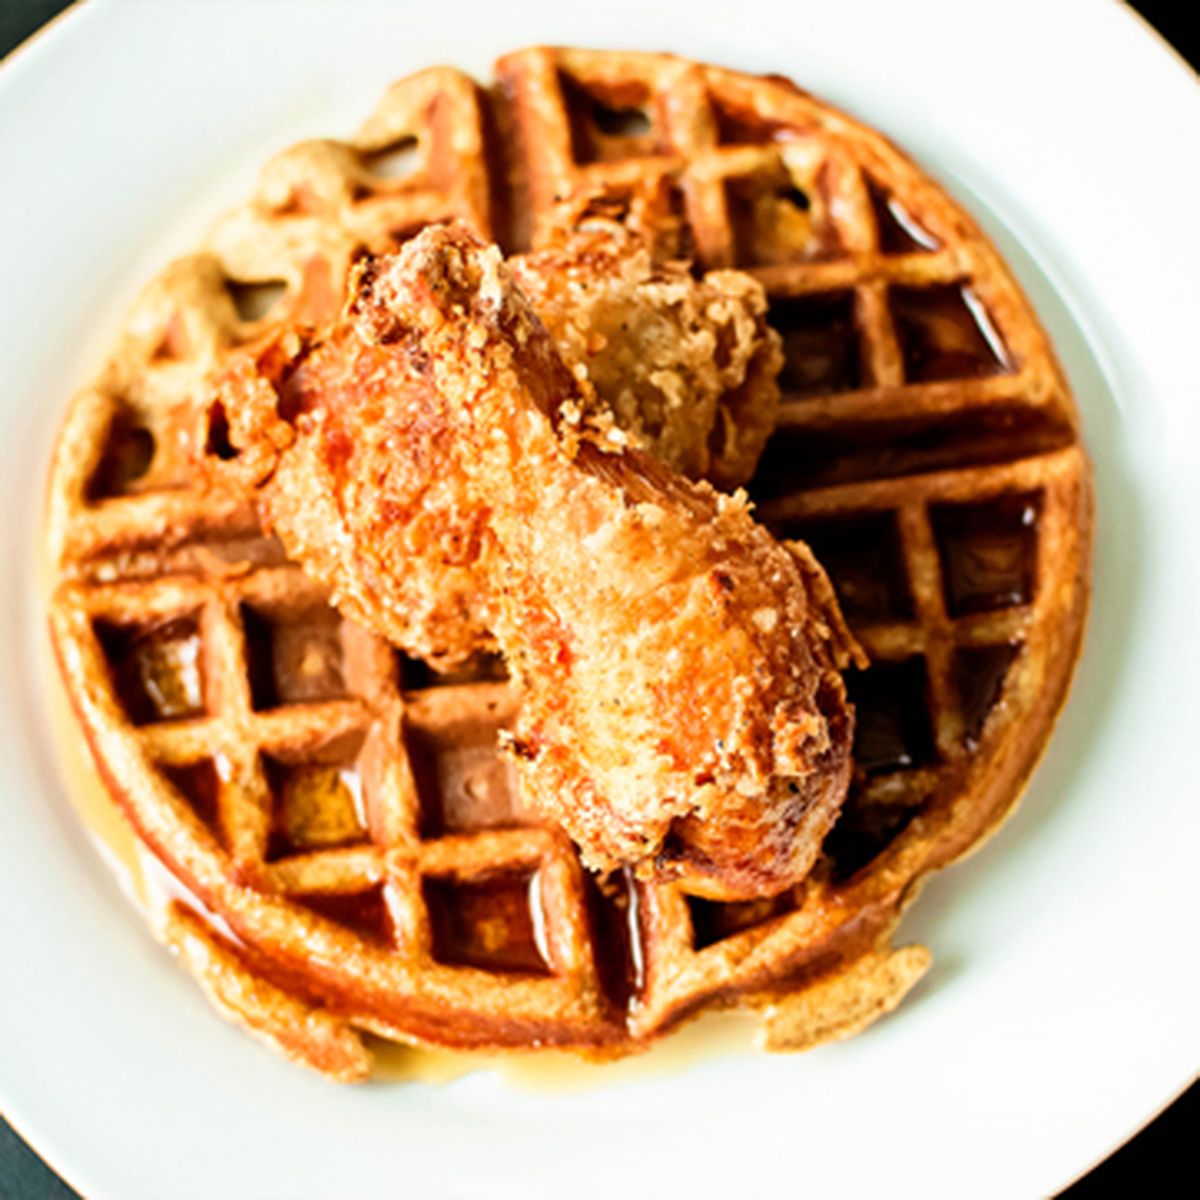 Best Chicken And Waffles Recipe How To Make Easy Chicken Waffles